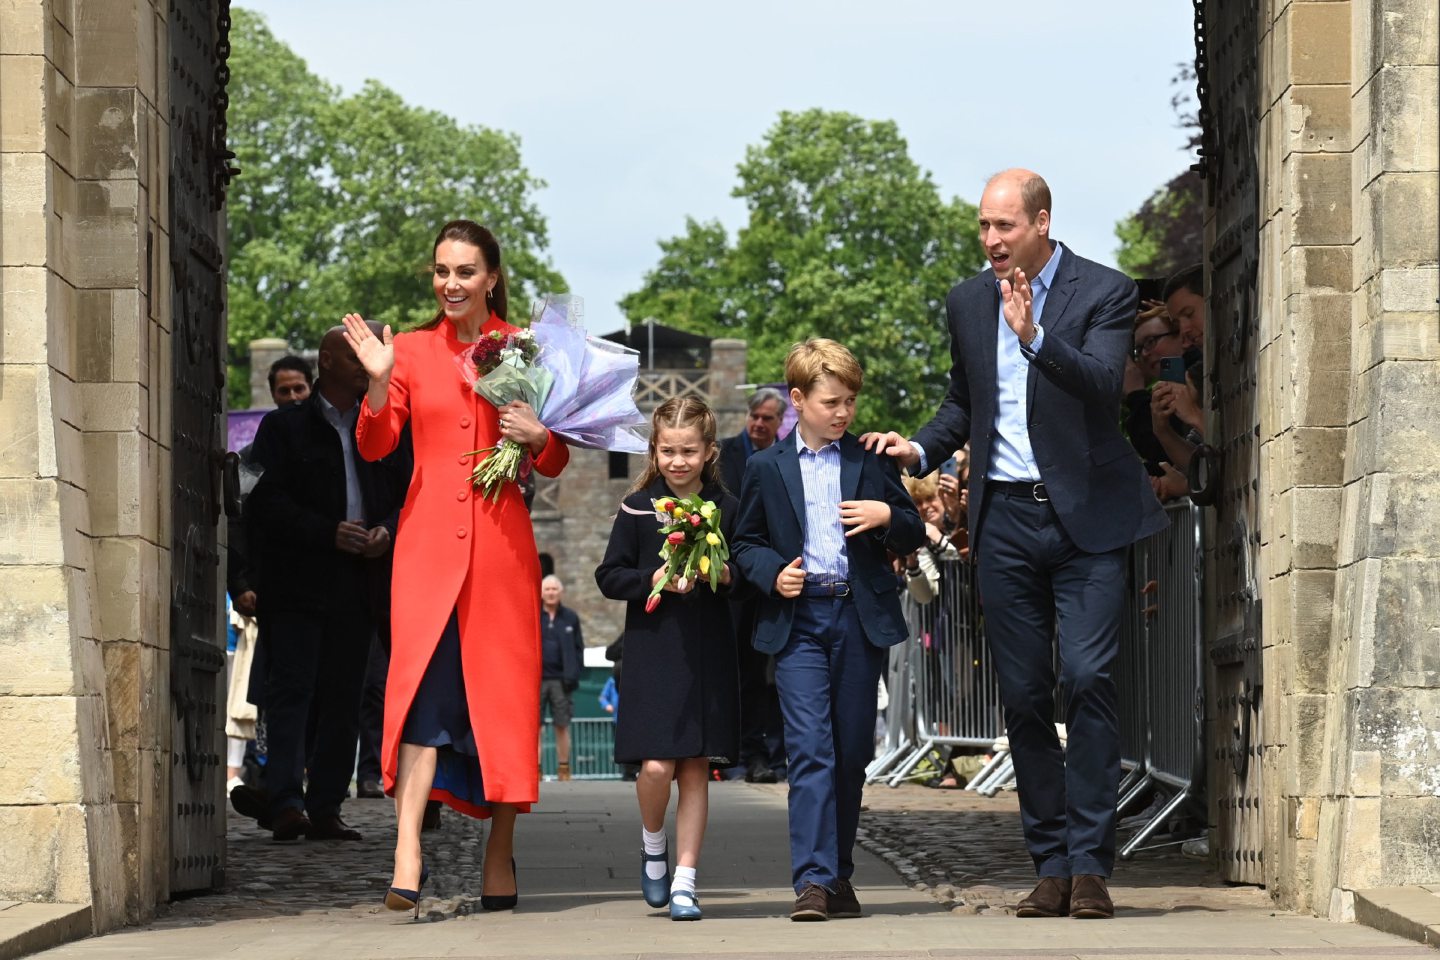 The Duke and Duchess of Cambridge, Prince George and Princess Charlotte during their visit to Cardiff Castle to meet performers and crew involved in the Platinum Jubilee Celebration Concert